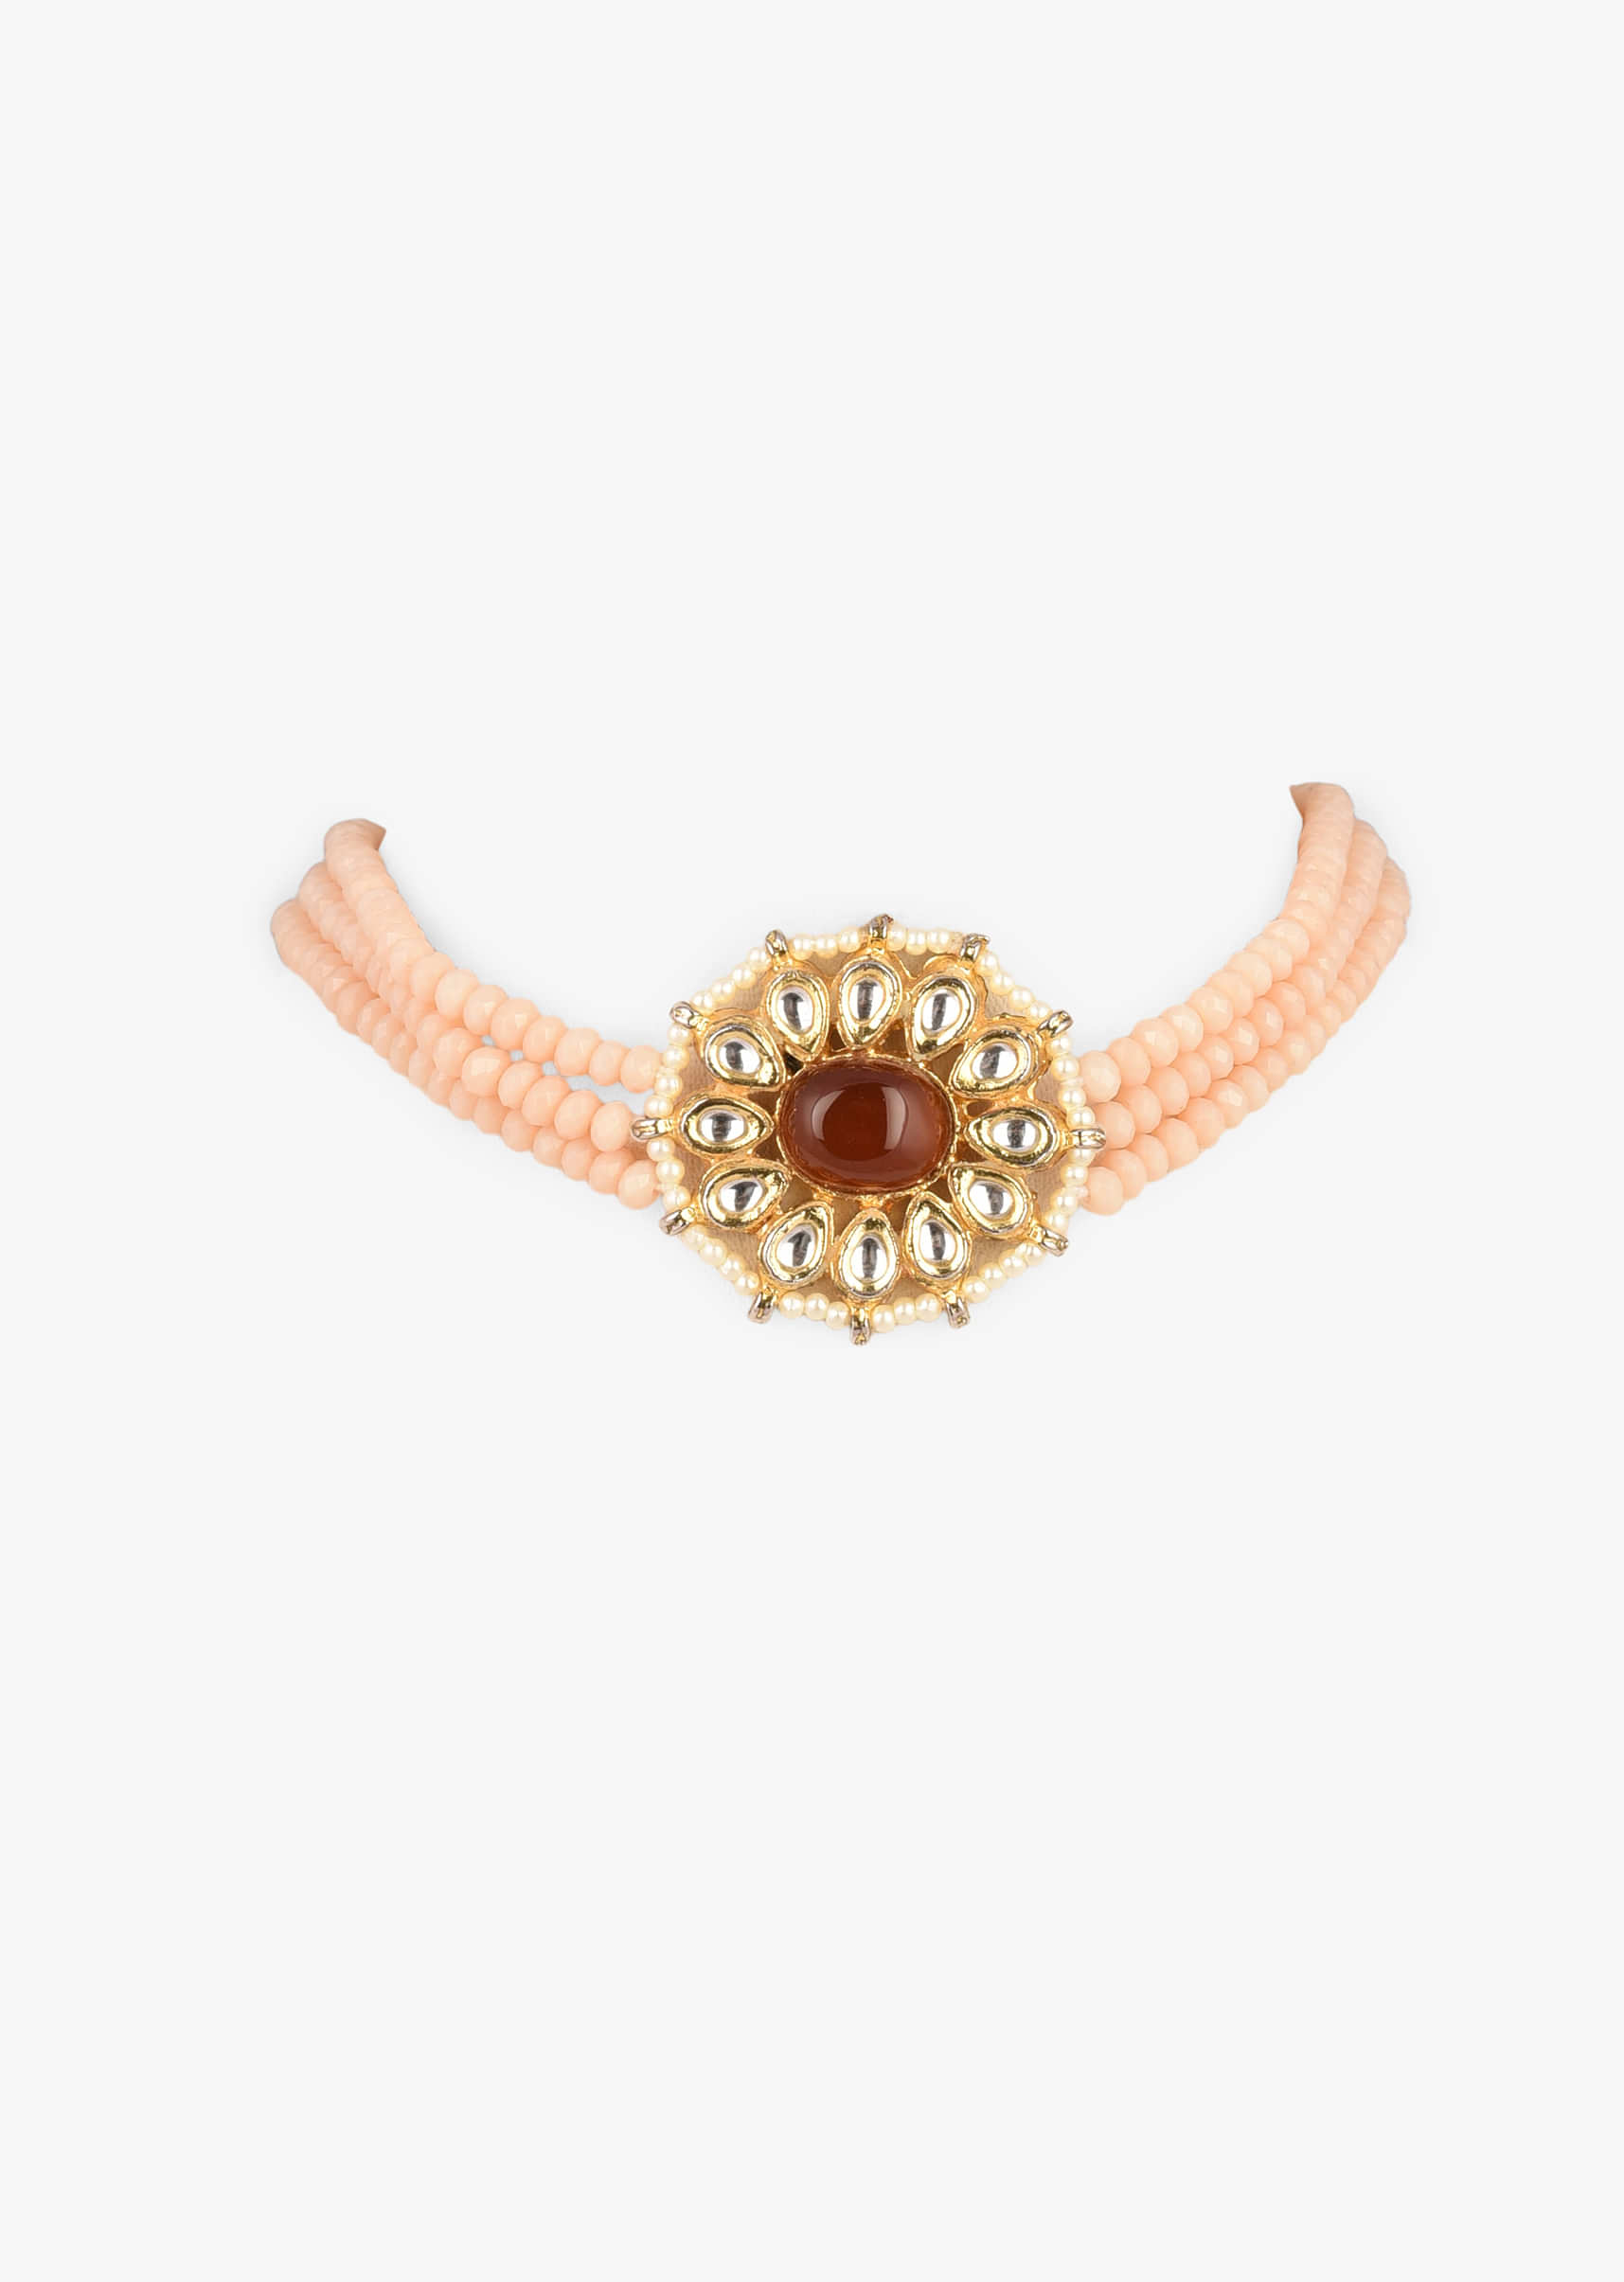 Gold Plated Choker Necklace With Maroon Oval Stone Centre And Peach Bead Strings 